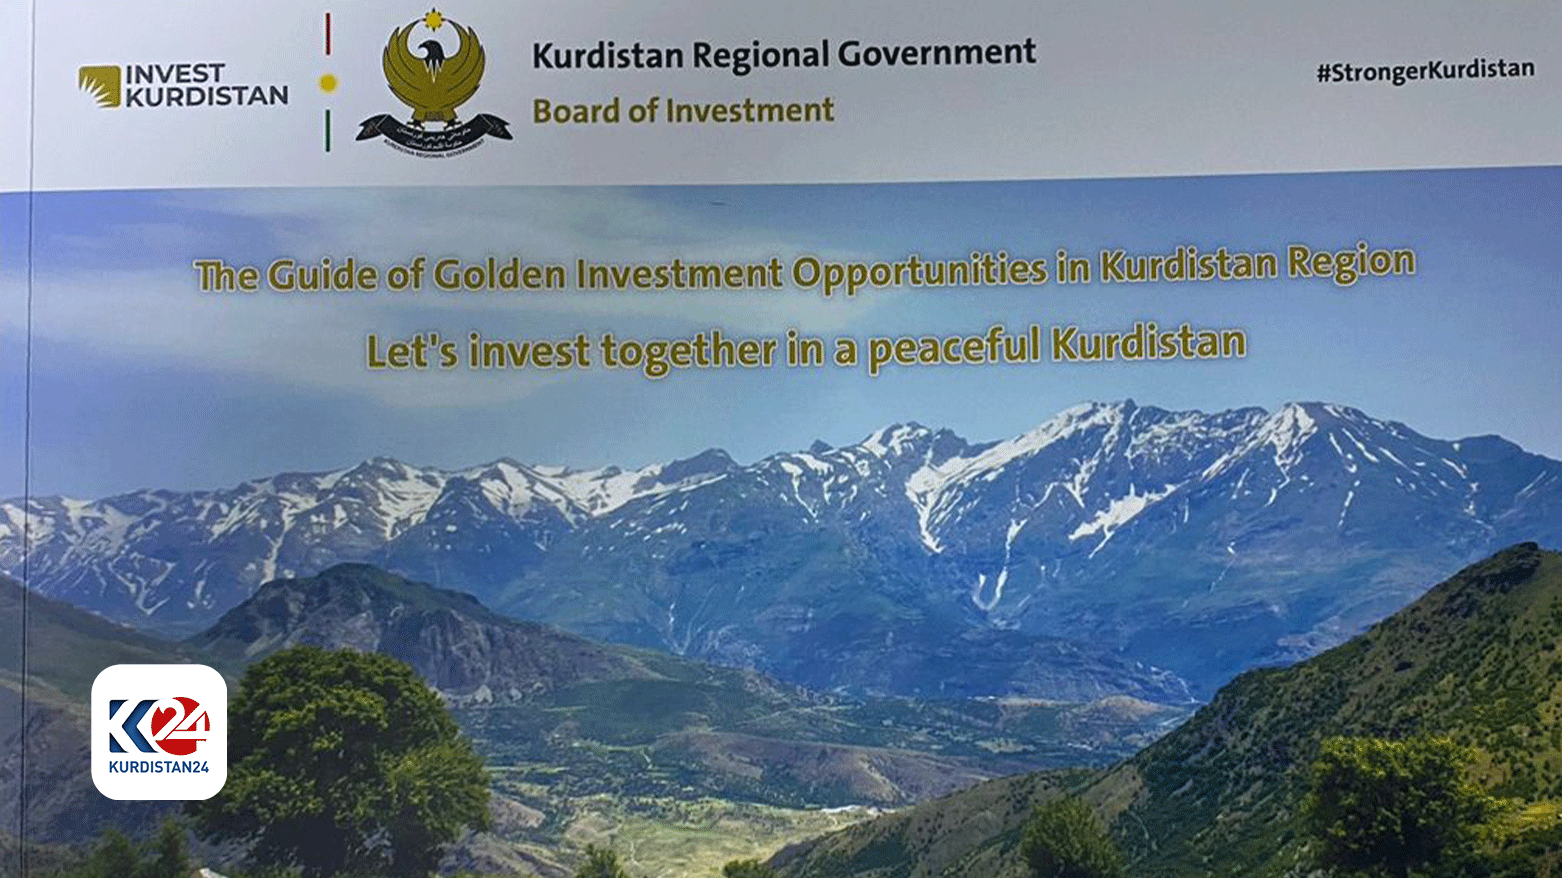 The cover of the Guide of Golden Investment Opportunities in Kurdistan Region. (Photo: KRG)